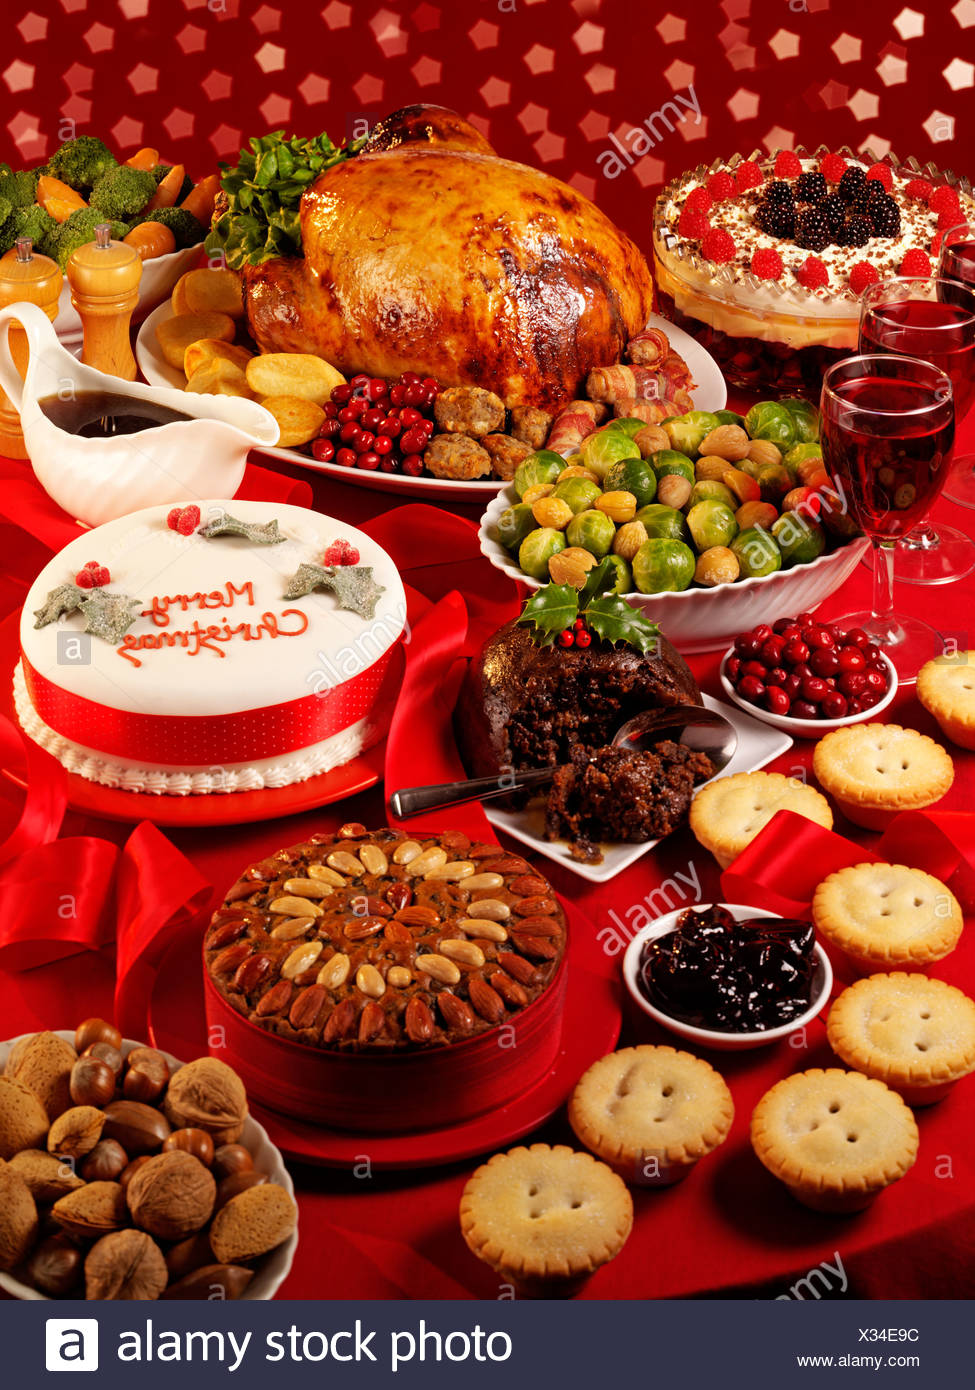 Christmas Turkey Pudding High Resolution Stock Photography and Images ...